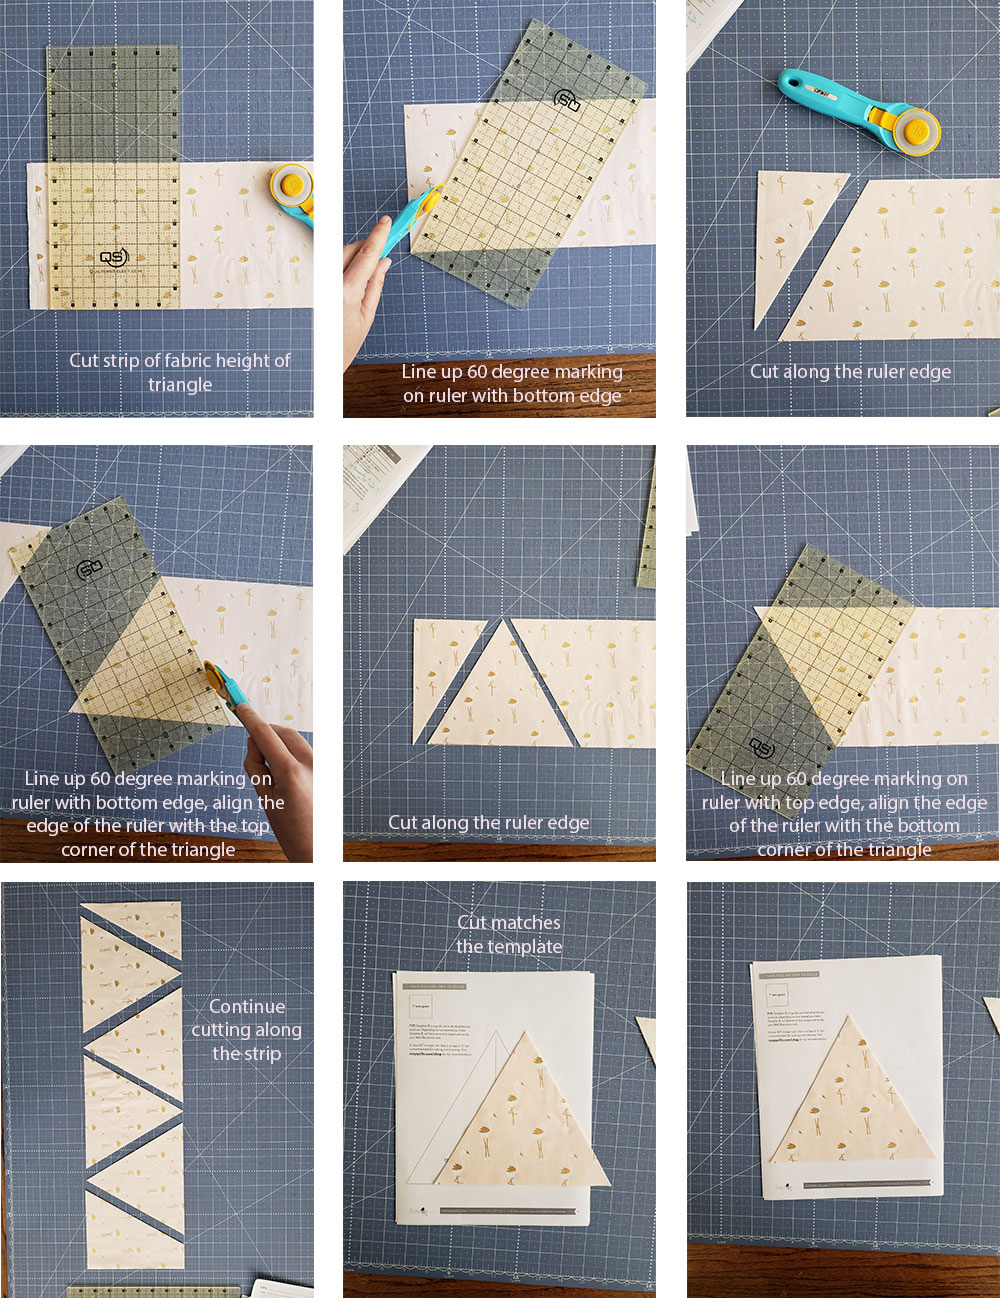 The Mod Mountains quilt pattern is fat quarter friendly and great for using fabric scraps from your stash. Video tutorials show step by step how to cut templates and sew triangles.